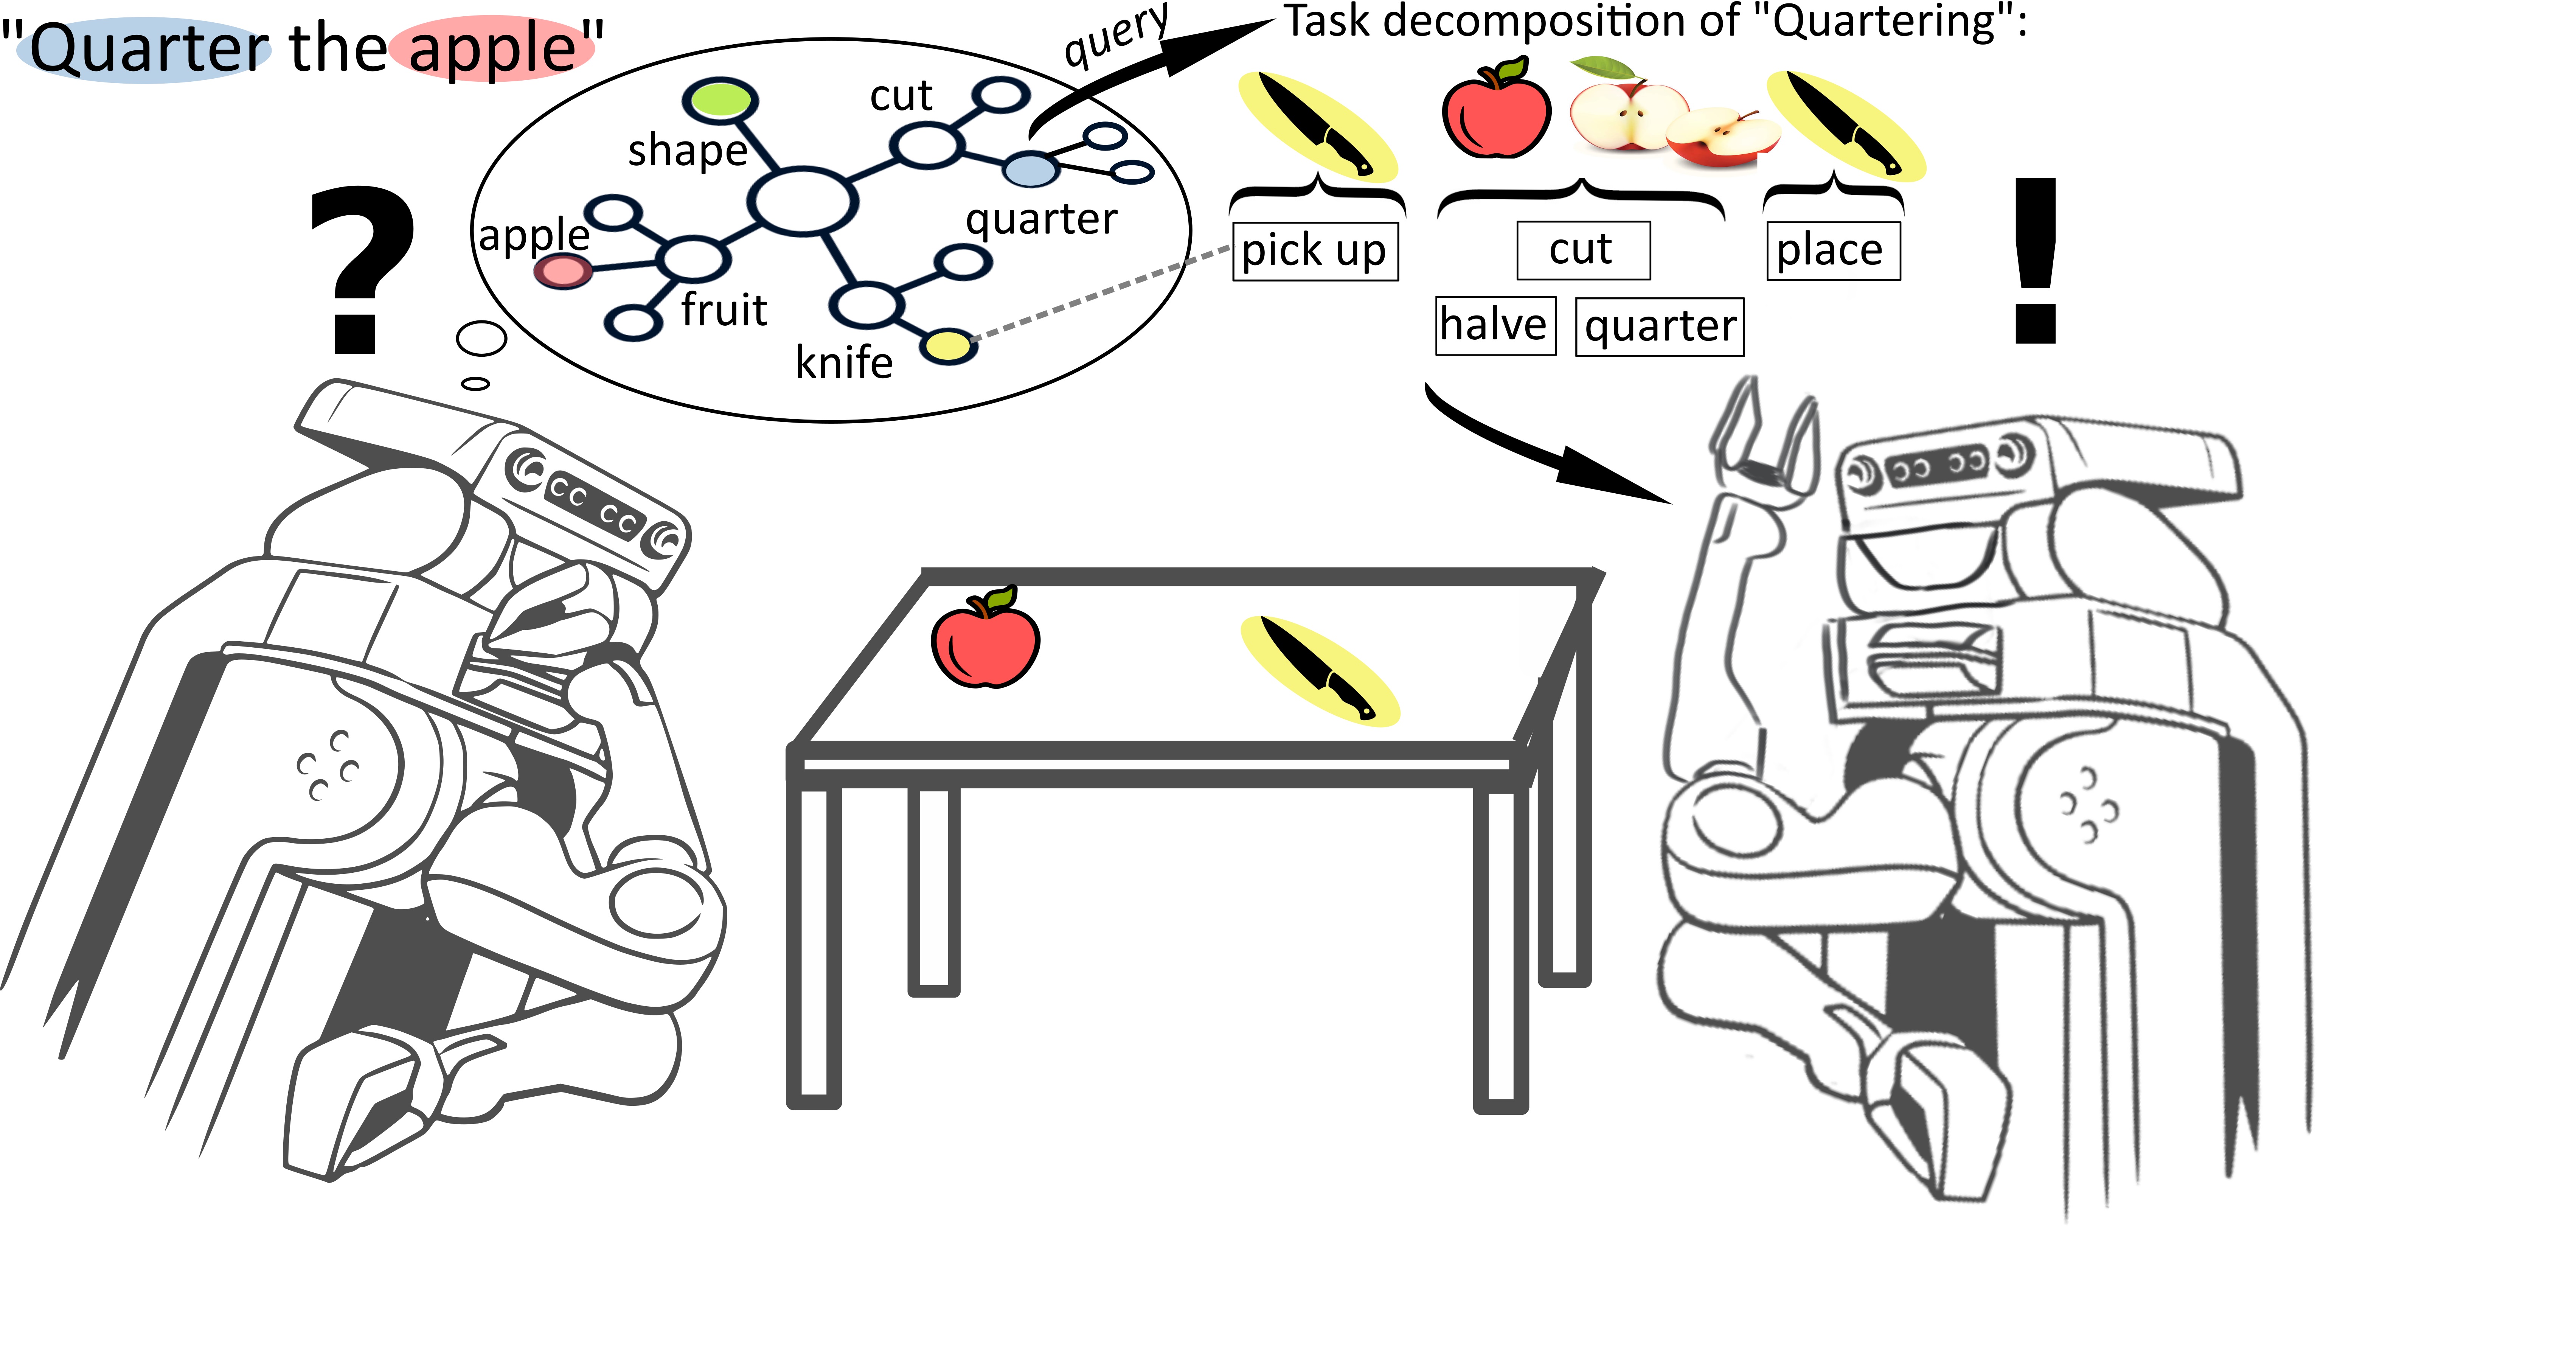 Enabling cognitive robots to cut food objects through an ontology